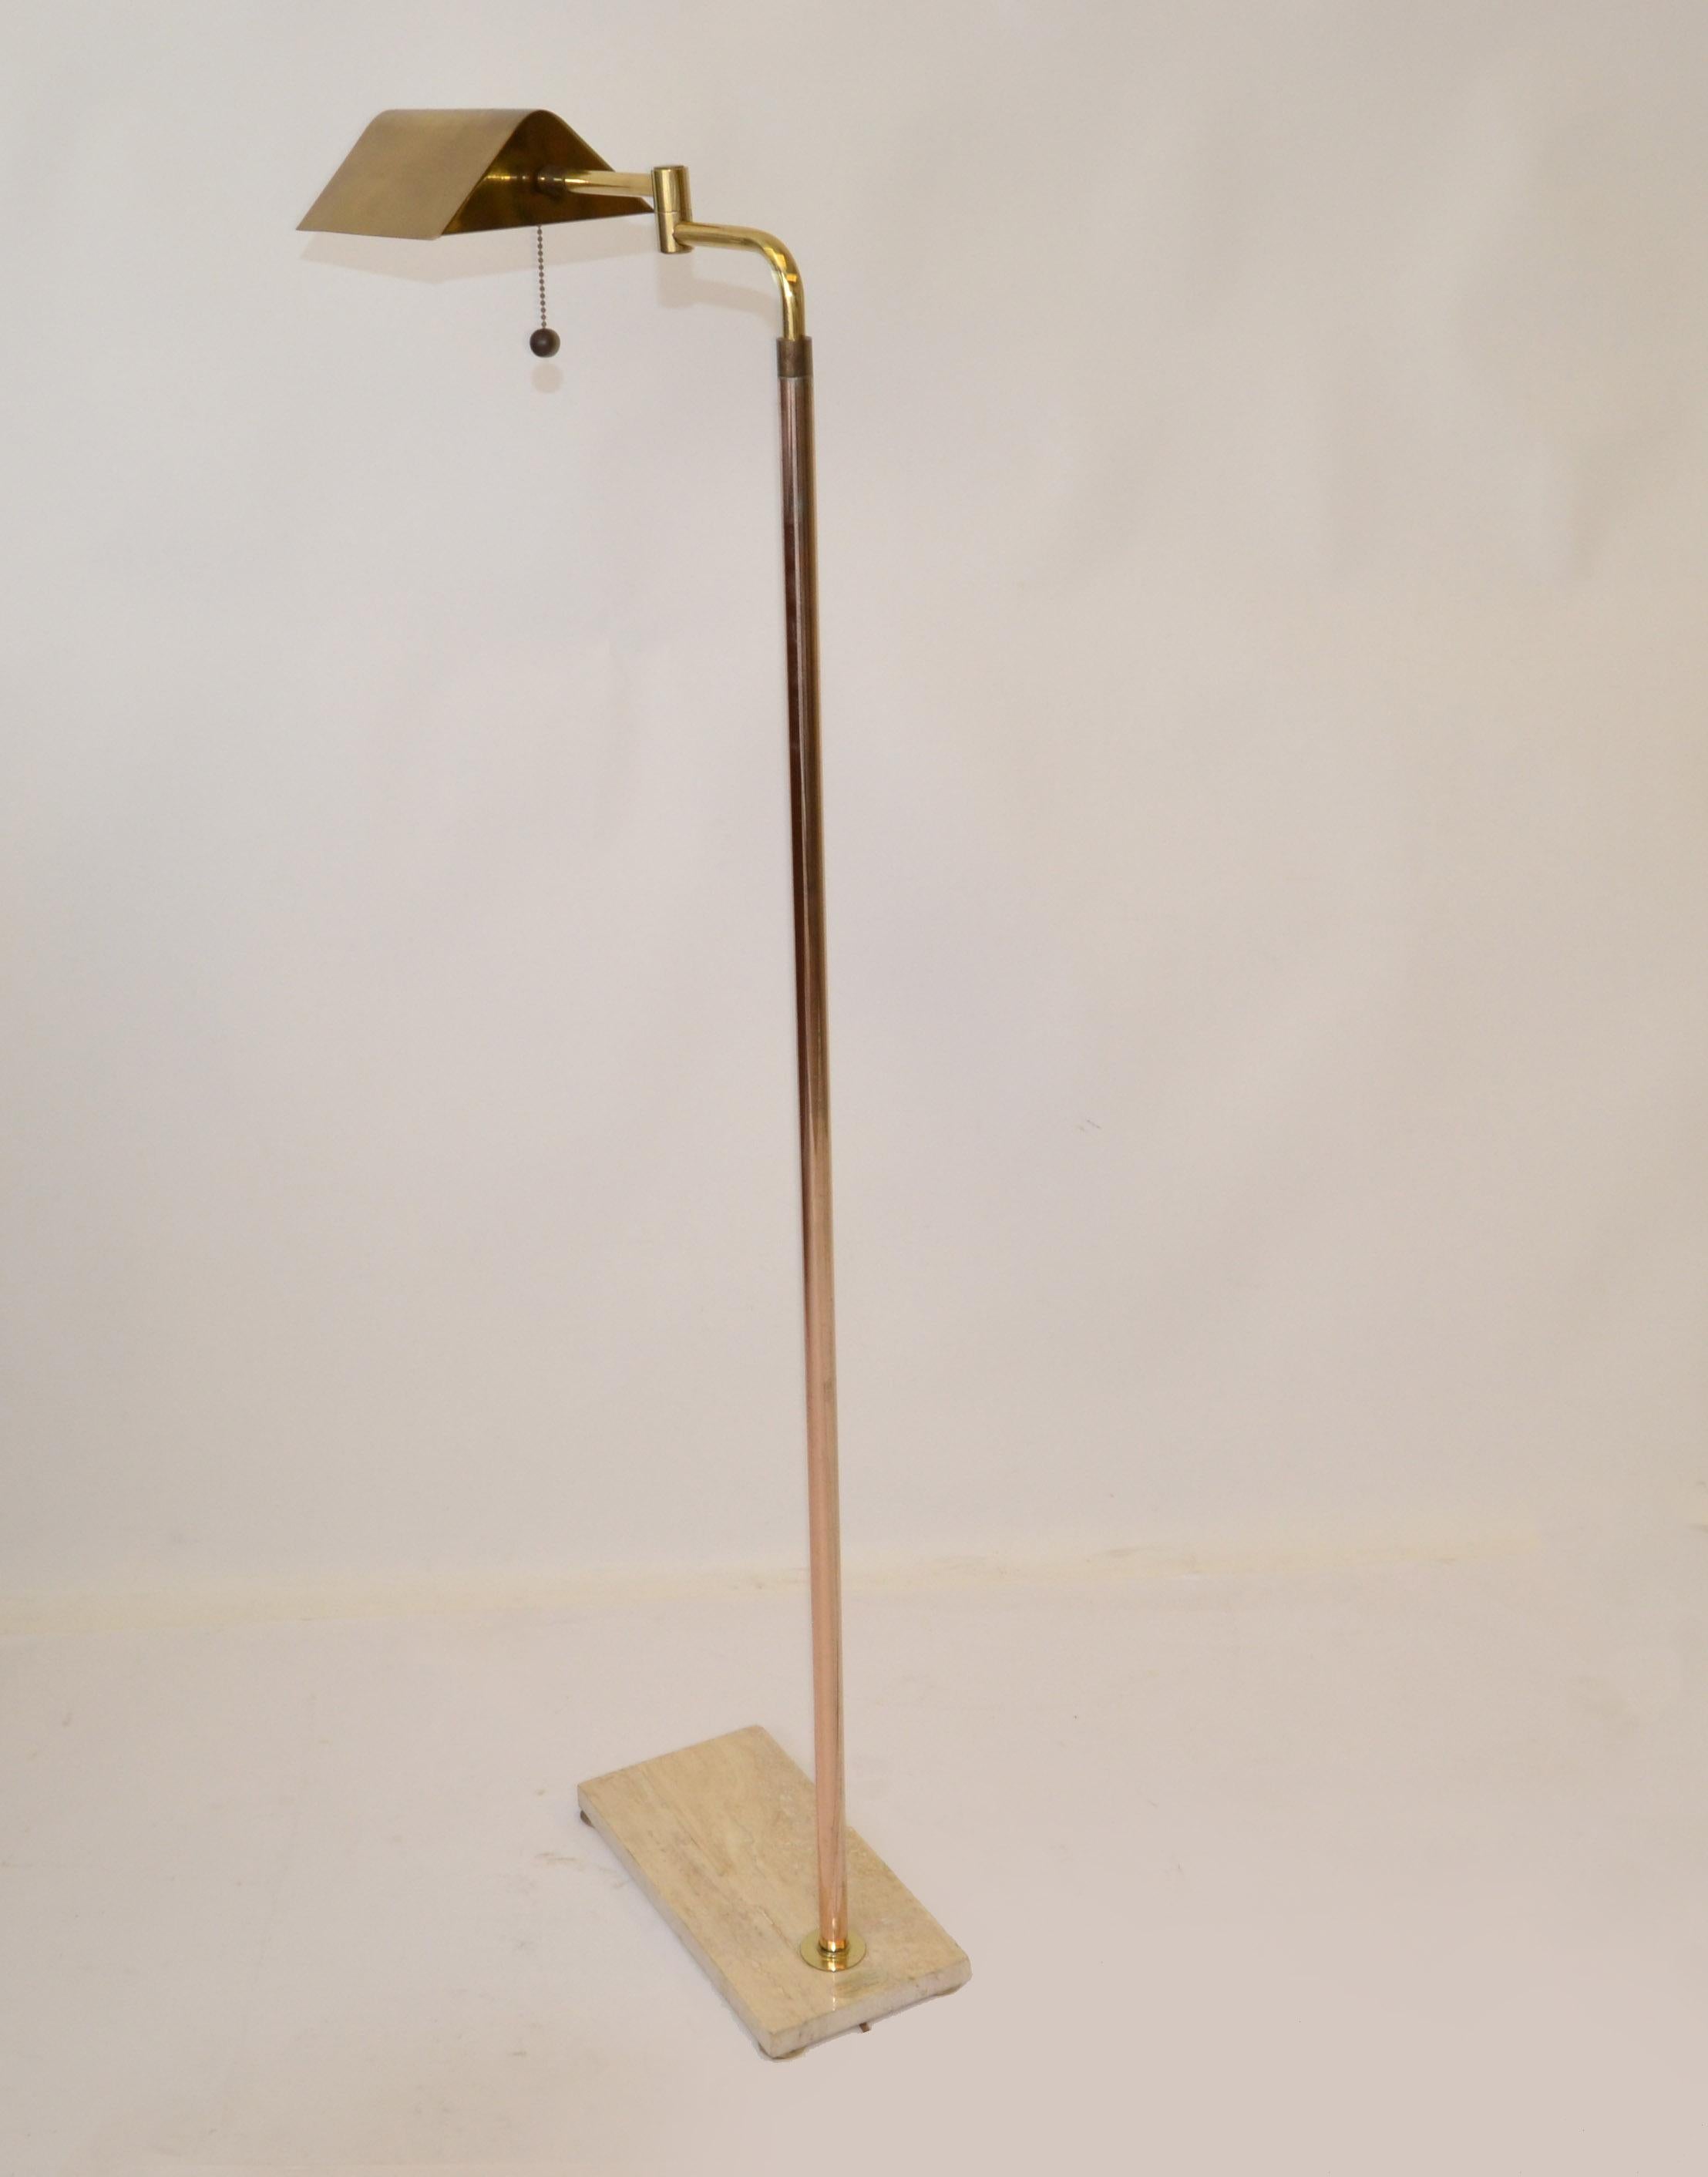 Mid-Century Modern Italian two patina Brass swing arm floor or reading lamp mounted on a beige genuine hand crafted marble base.
Comes with a footswitch and the shade rotates.
Wired for the U.S. and uses a regular or LED light bulb as shown in the